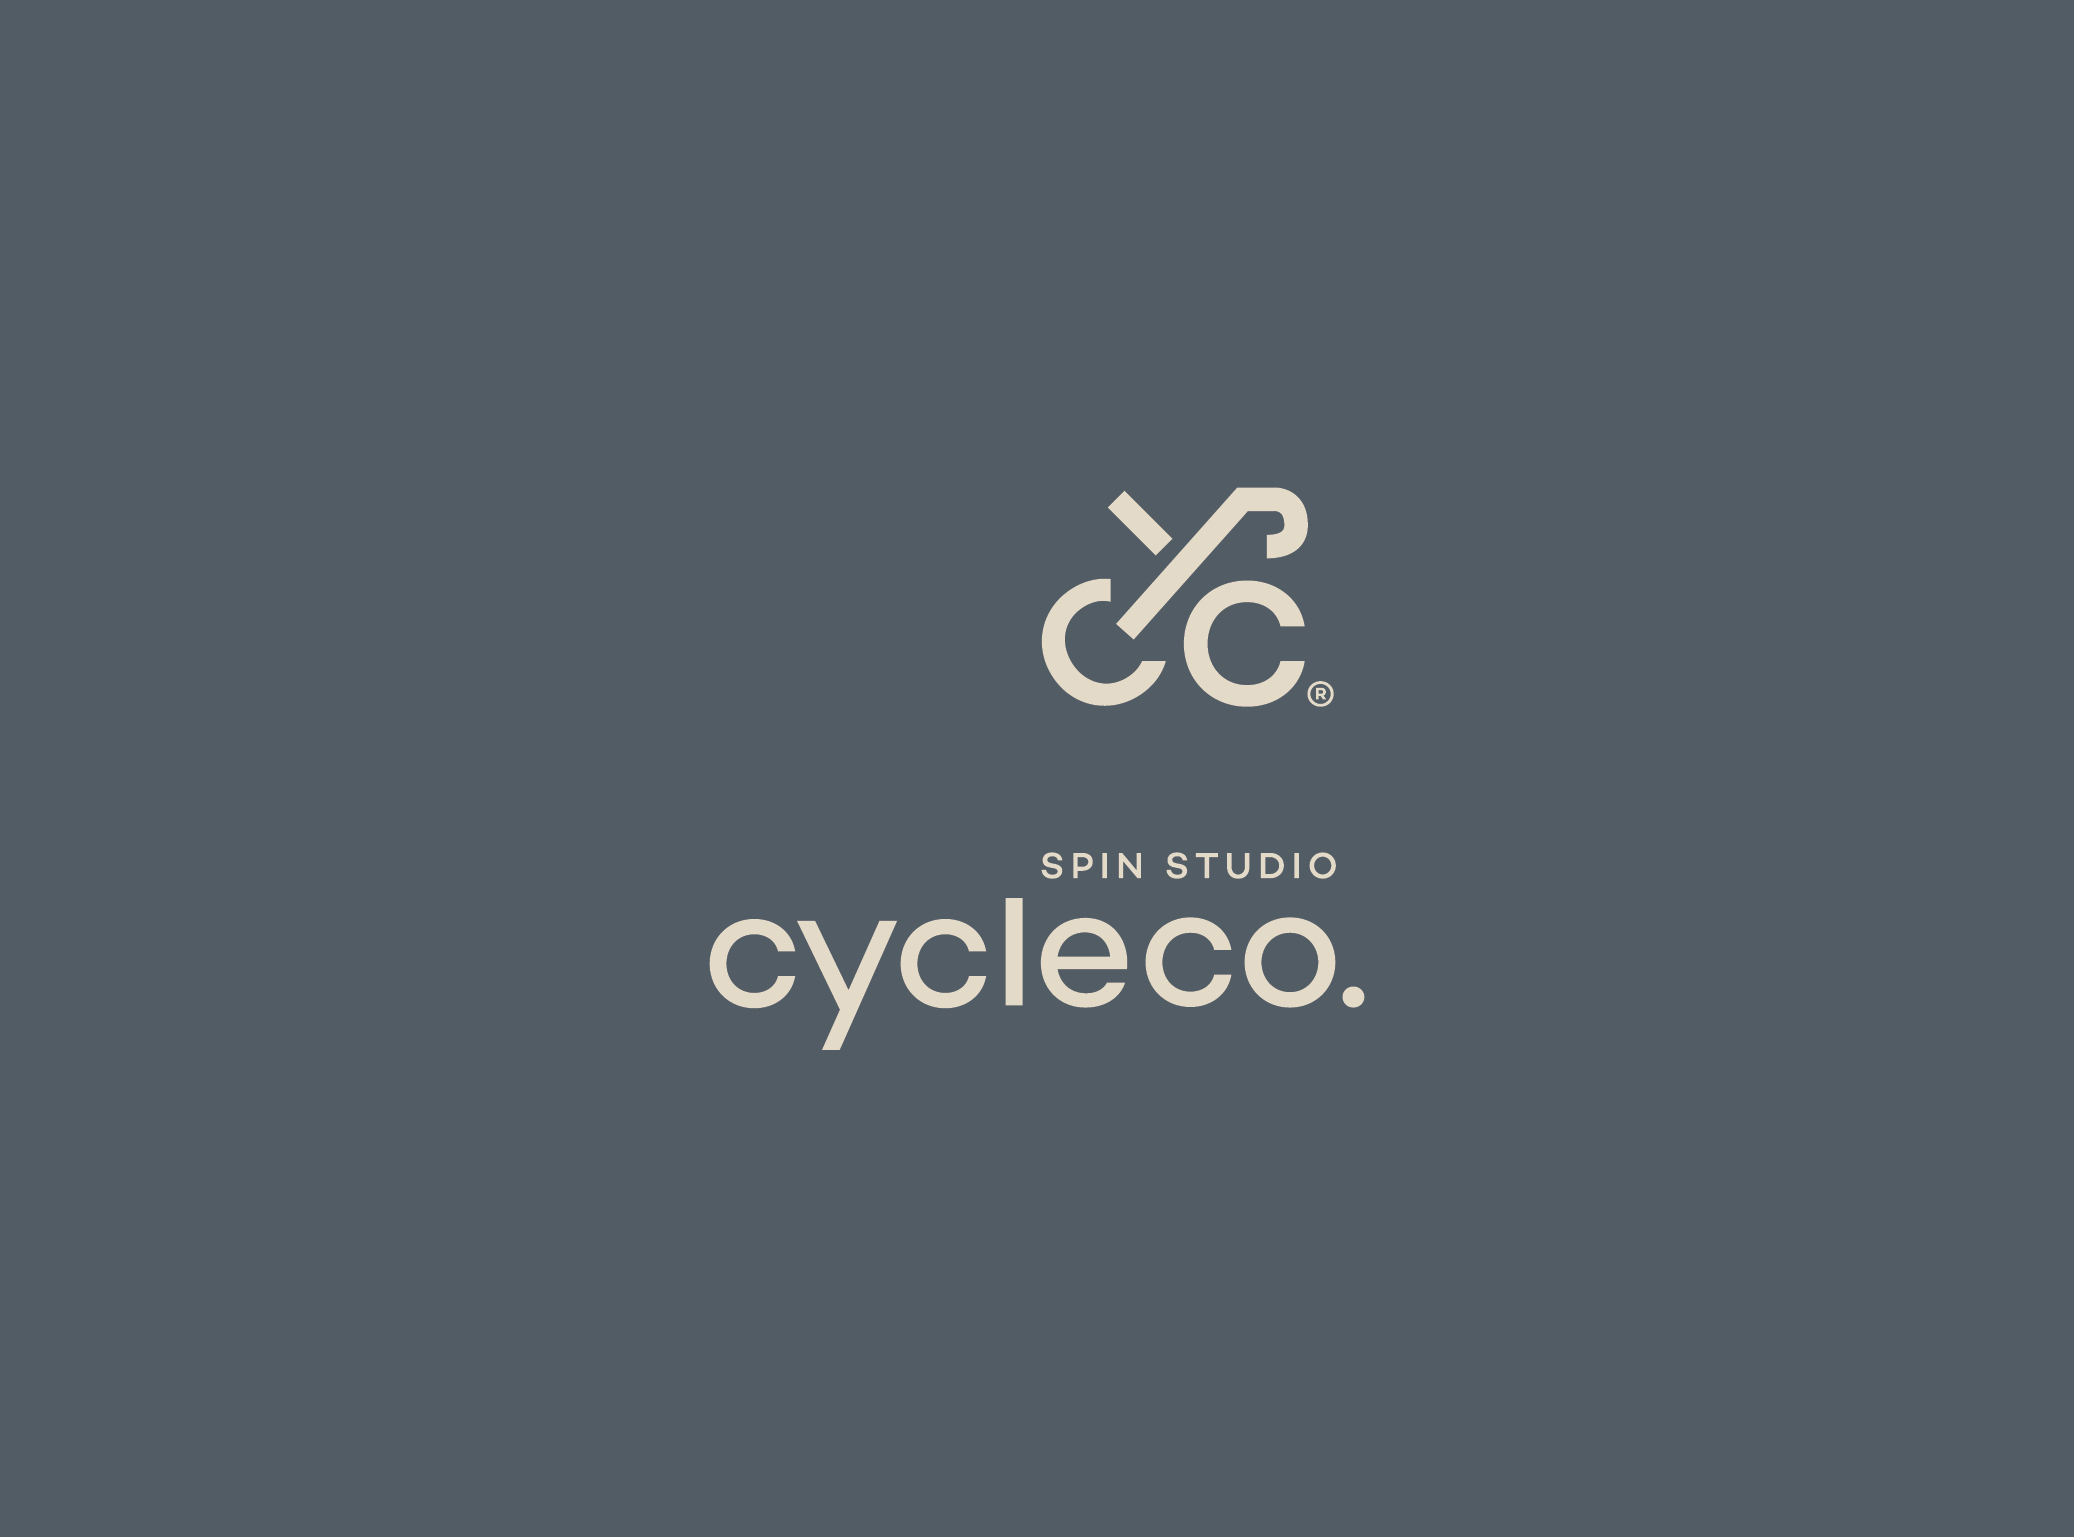 Cycle Co. Spin Studio Brand Identity, Merchandise and Signage Design and Development by TL Design Co.